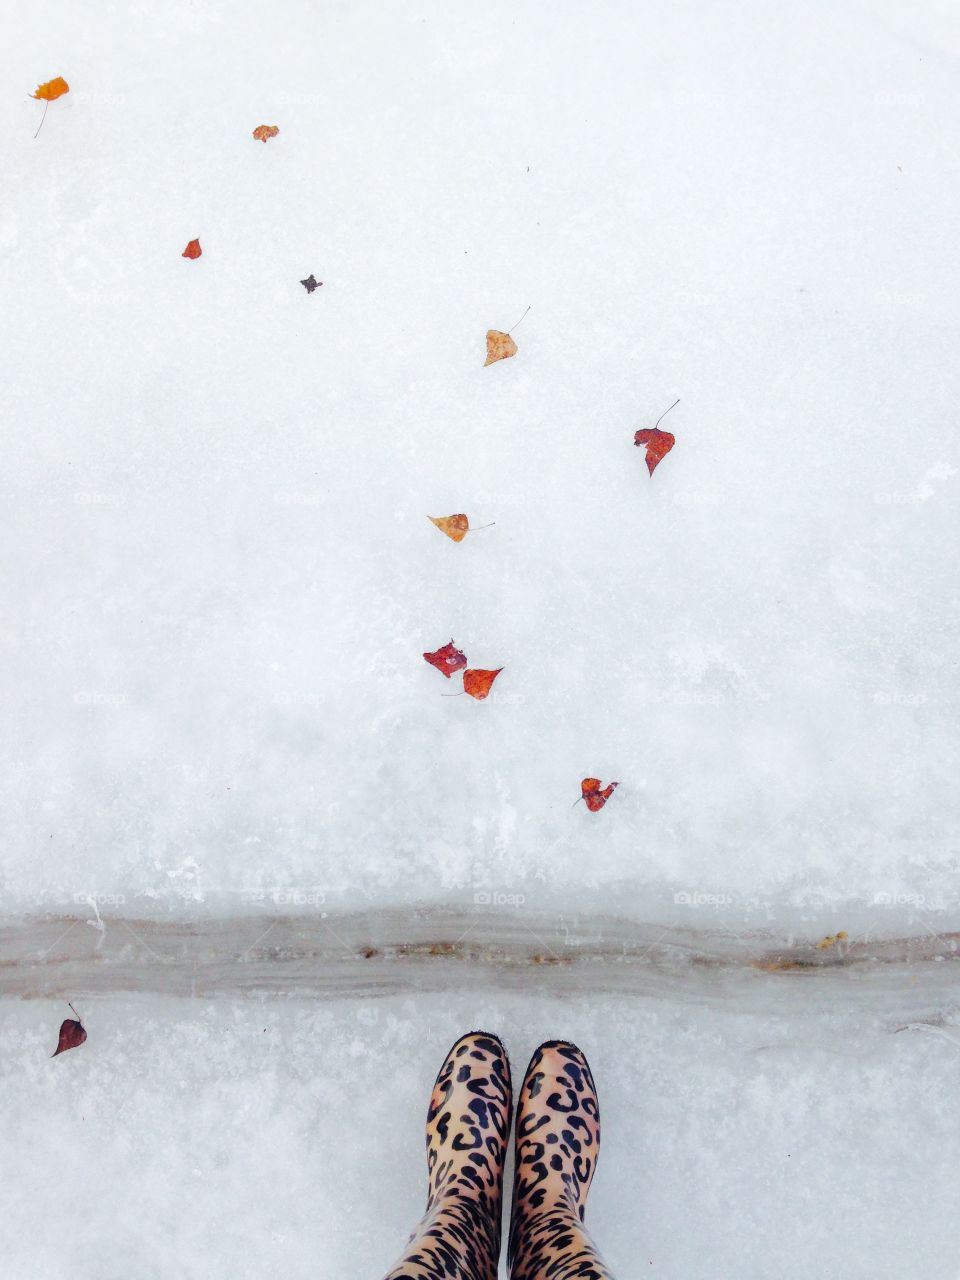 I like to have a walk at frozen Dnipro river. Sometimes you can find there bright frozen autumn leaves, which look as a treasure. Feet view, standing on the ice, covering frozen leaves. 